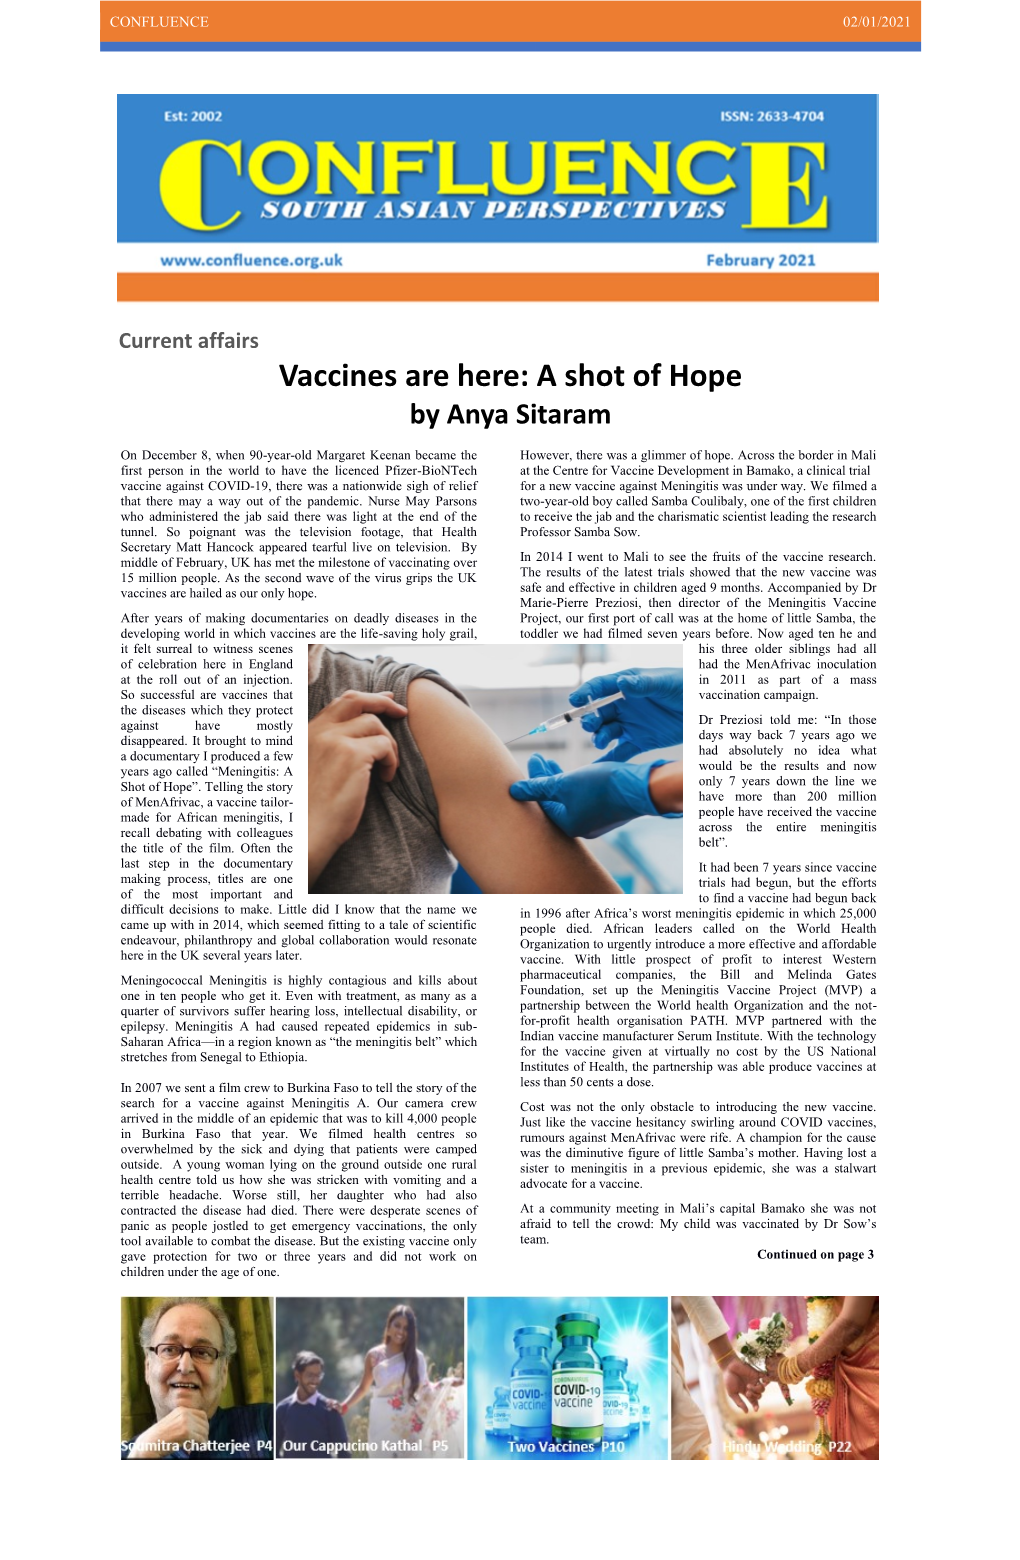 Vaccines Are Here: a Shot of Hope by Anya Sitaram